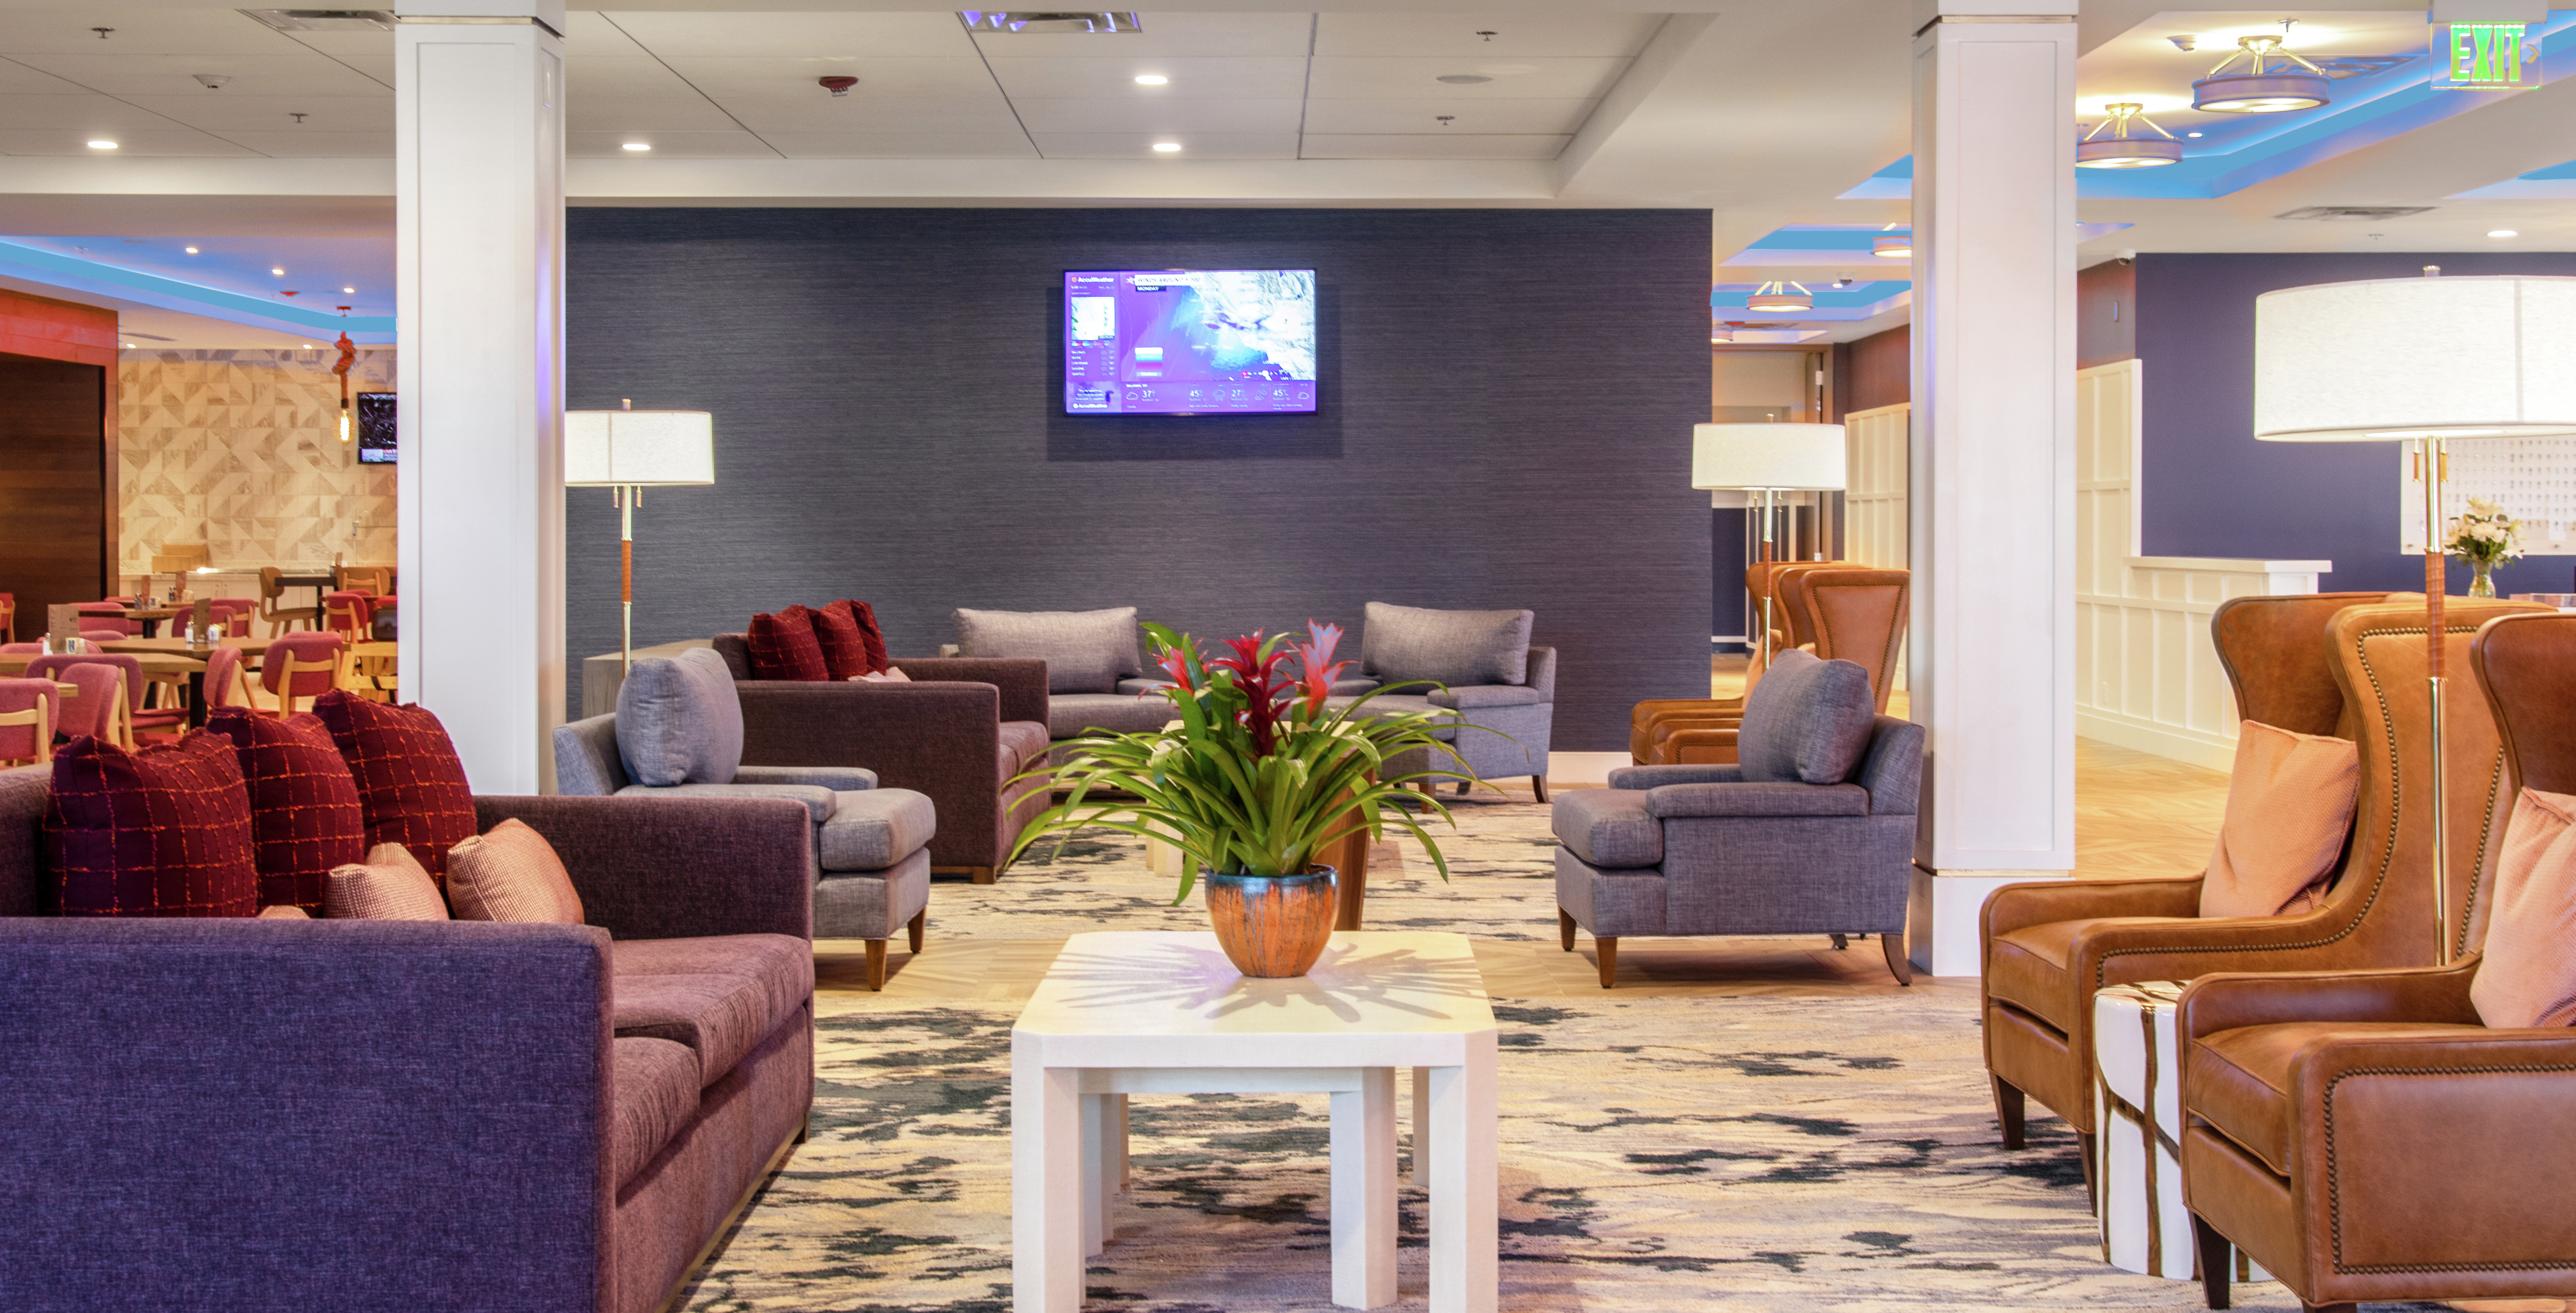 Lobby Area with Comfortable Seats and HDTV